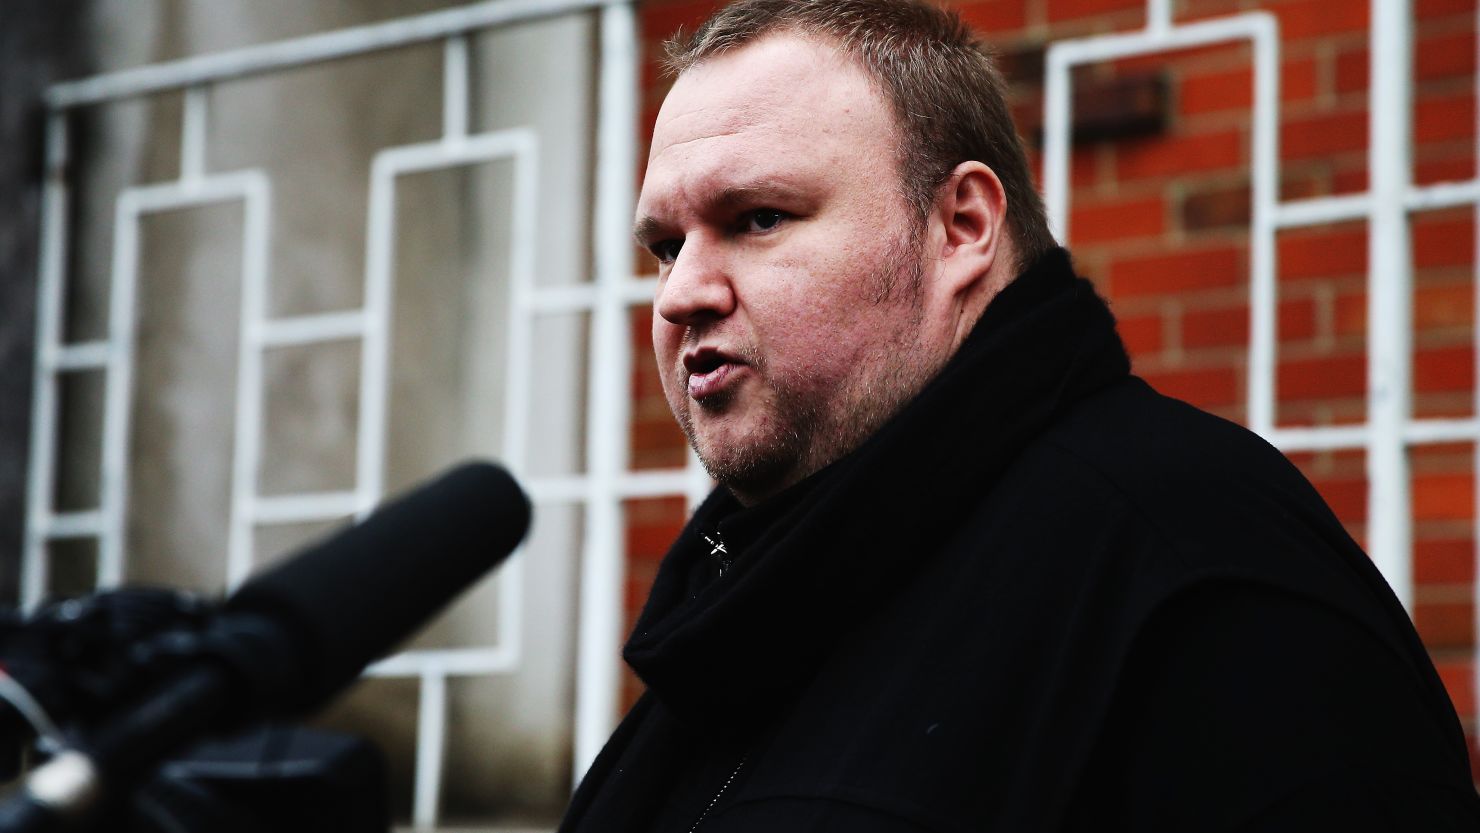 Kim Dotcom talks to media after casting his advance vote in the 2014 general NZ election in Auckland on September 3.